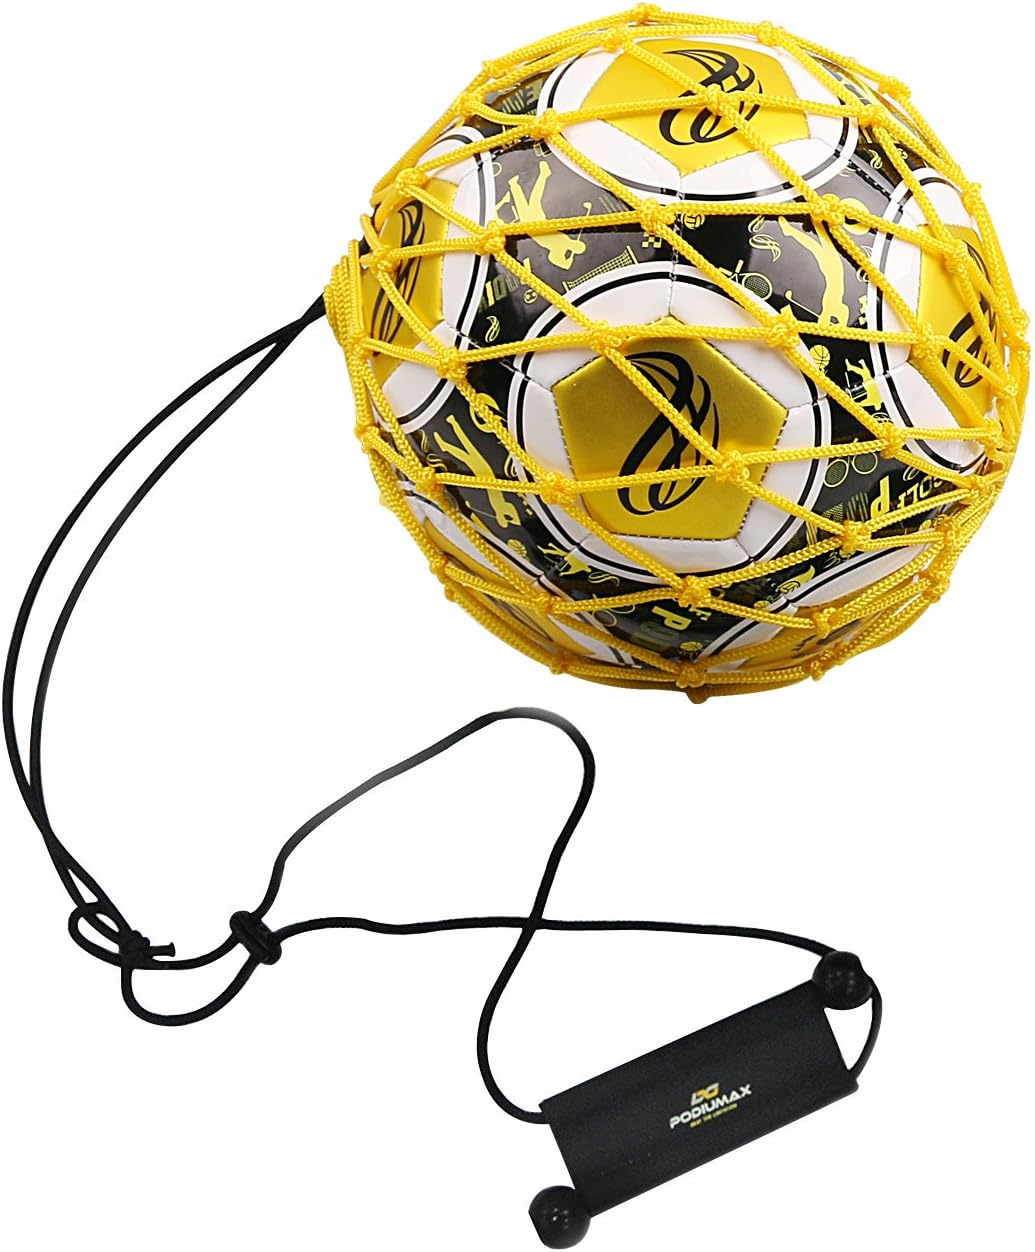 kick trainer for soccer players